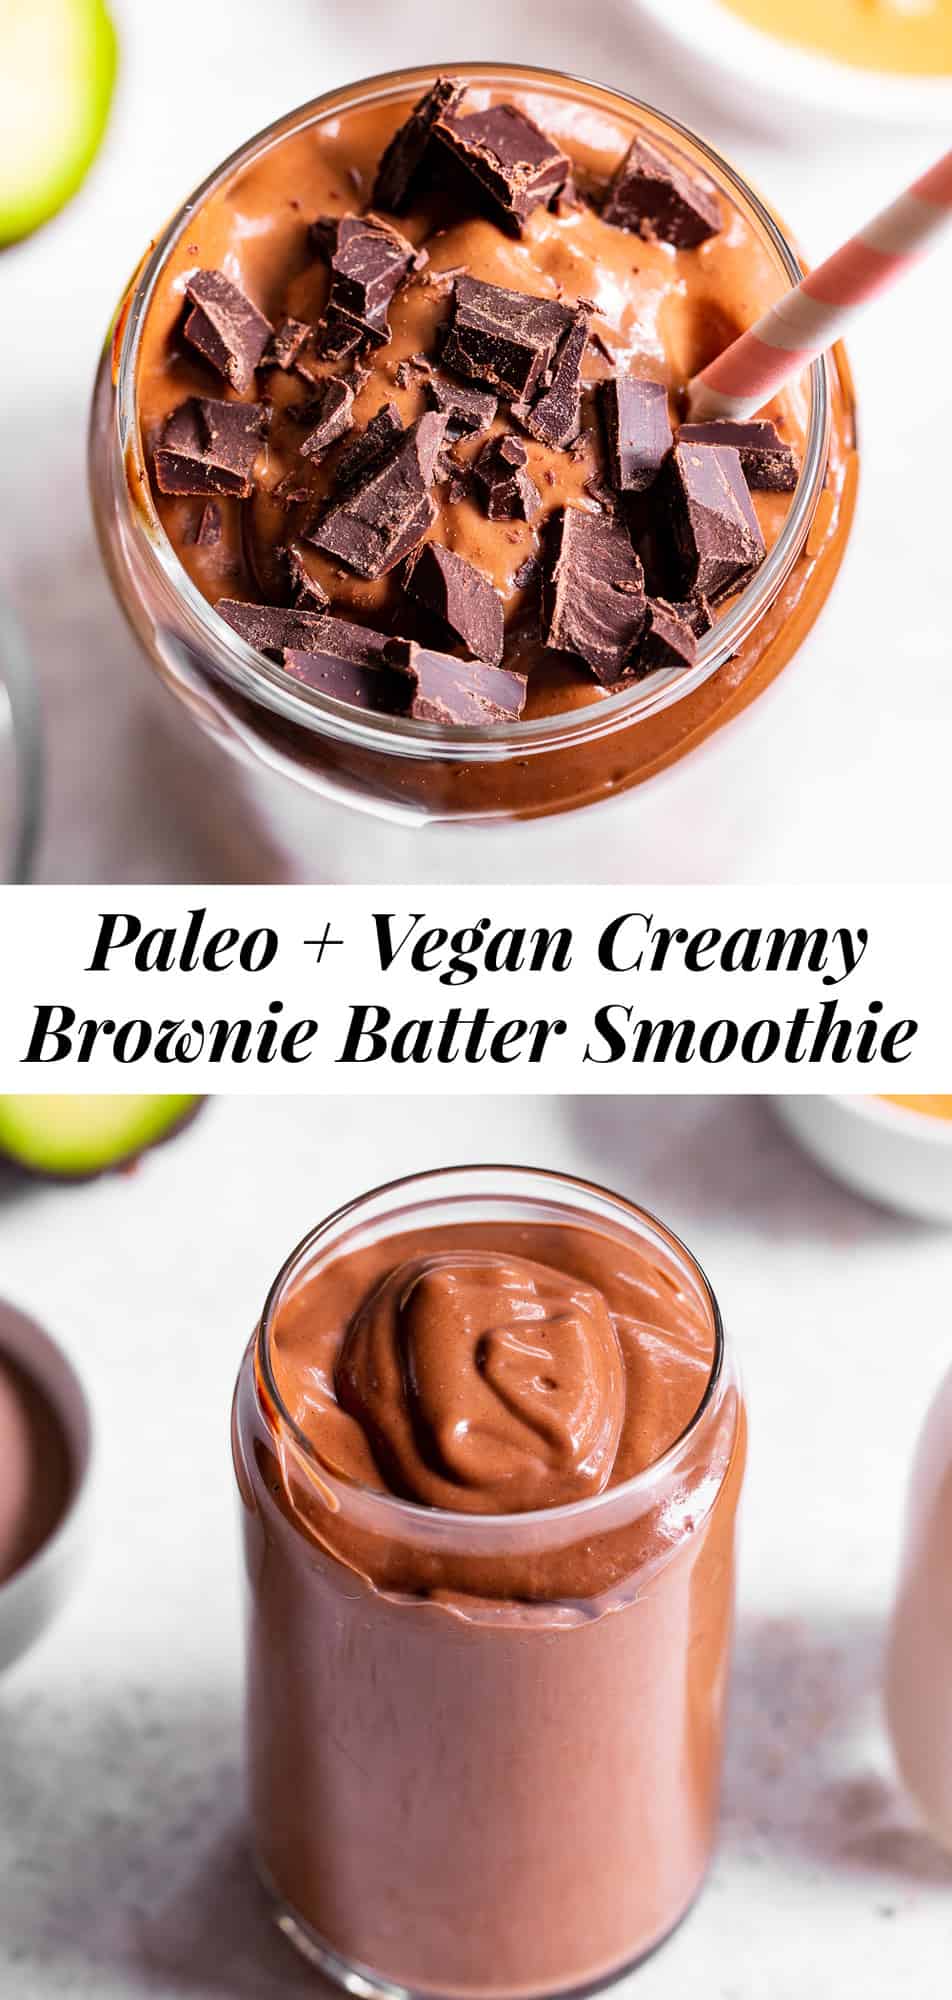 This creamy brownie batter chocolate smoothie is packed with good for you ingredients but tastes like dessert!  Have it for breakfast, a snack, or healthy dessert.  It's paleo friendly, dairy free, vegan and free of refined sugar.  Add your favorite chocolate protein powder for an extra chocolate kick! #paleo #vegan #cleaneating